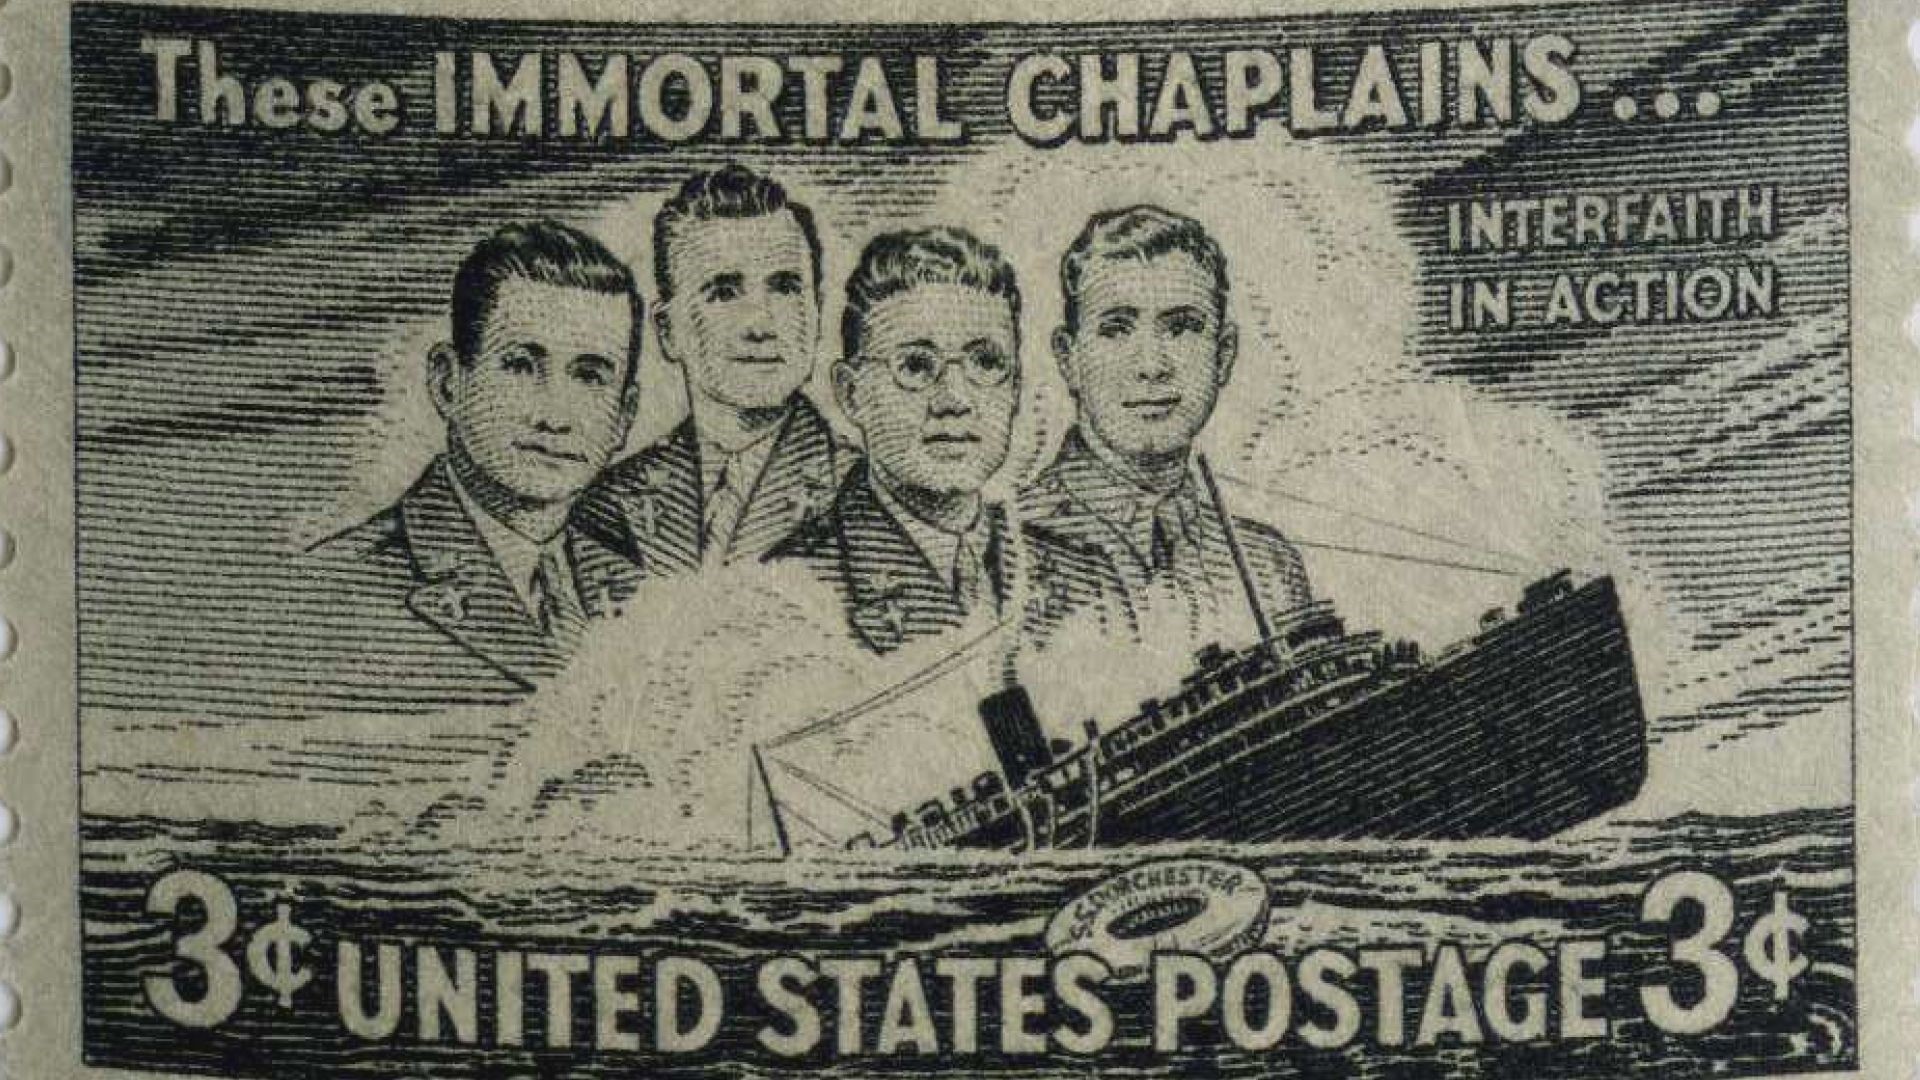 The legacy of the Four Chaplains lives on through York County memorial organization.